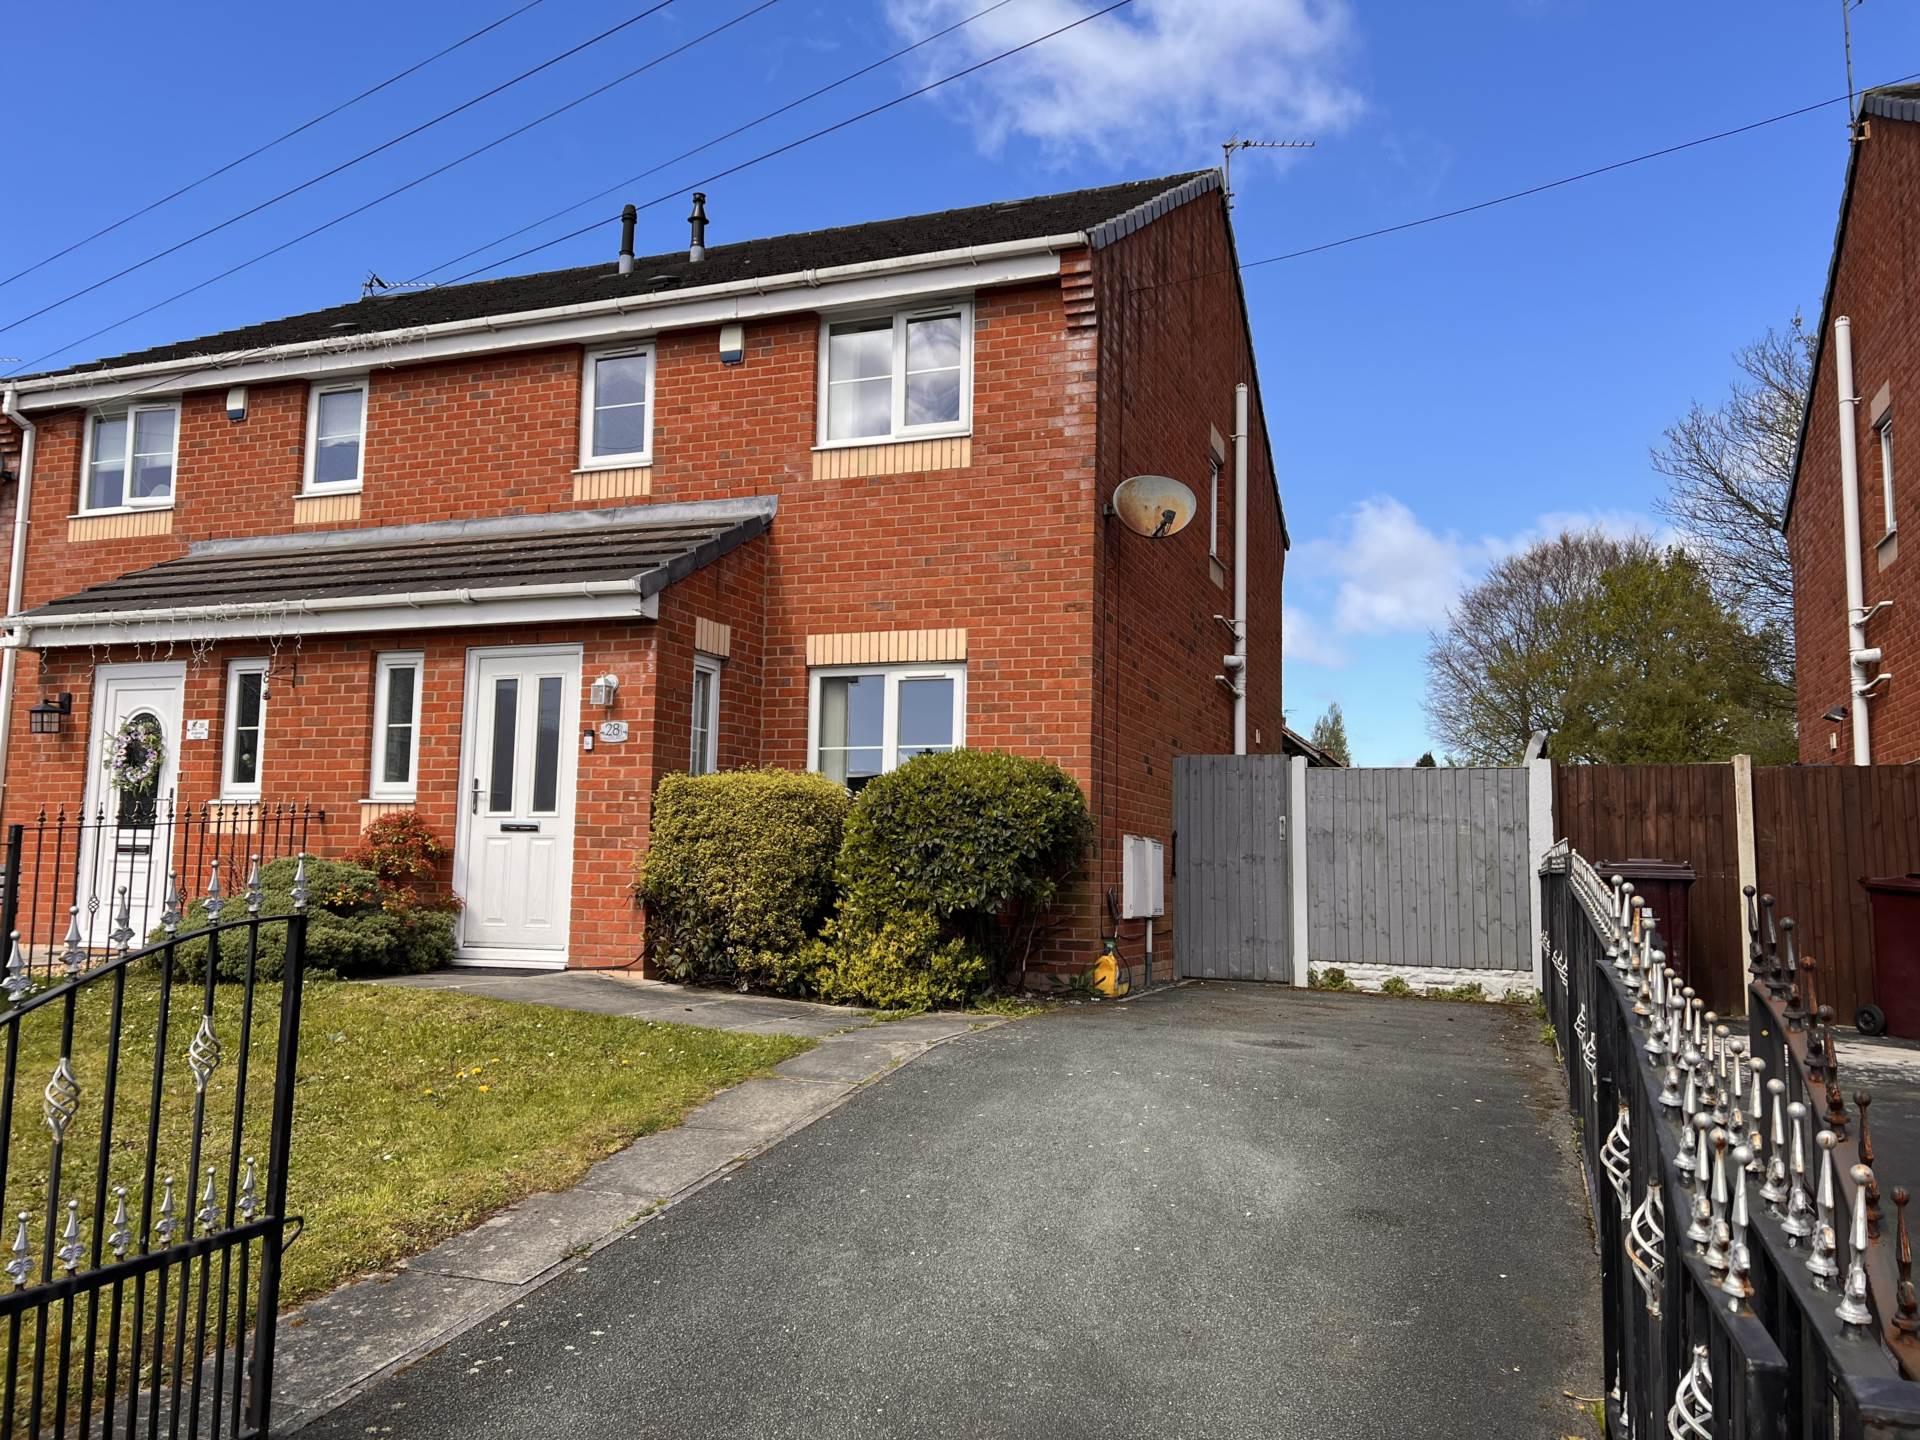 3 bed Semi-Detached House for rent in Liverpool. From Home Estate Agents Ltd - Tameside